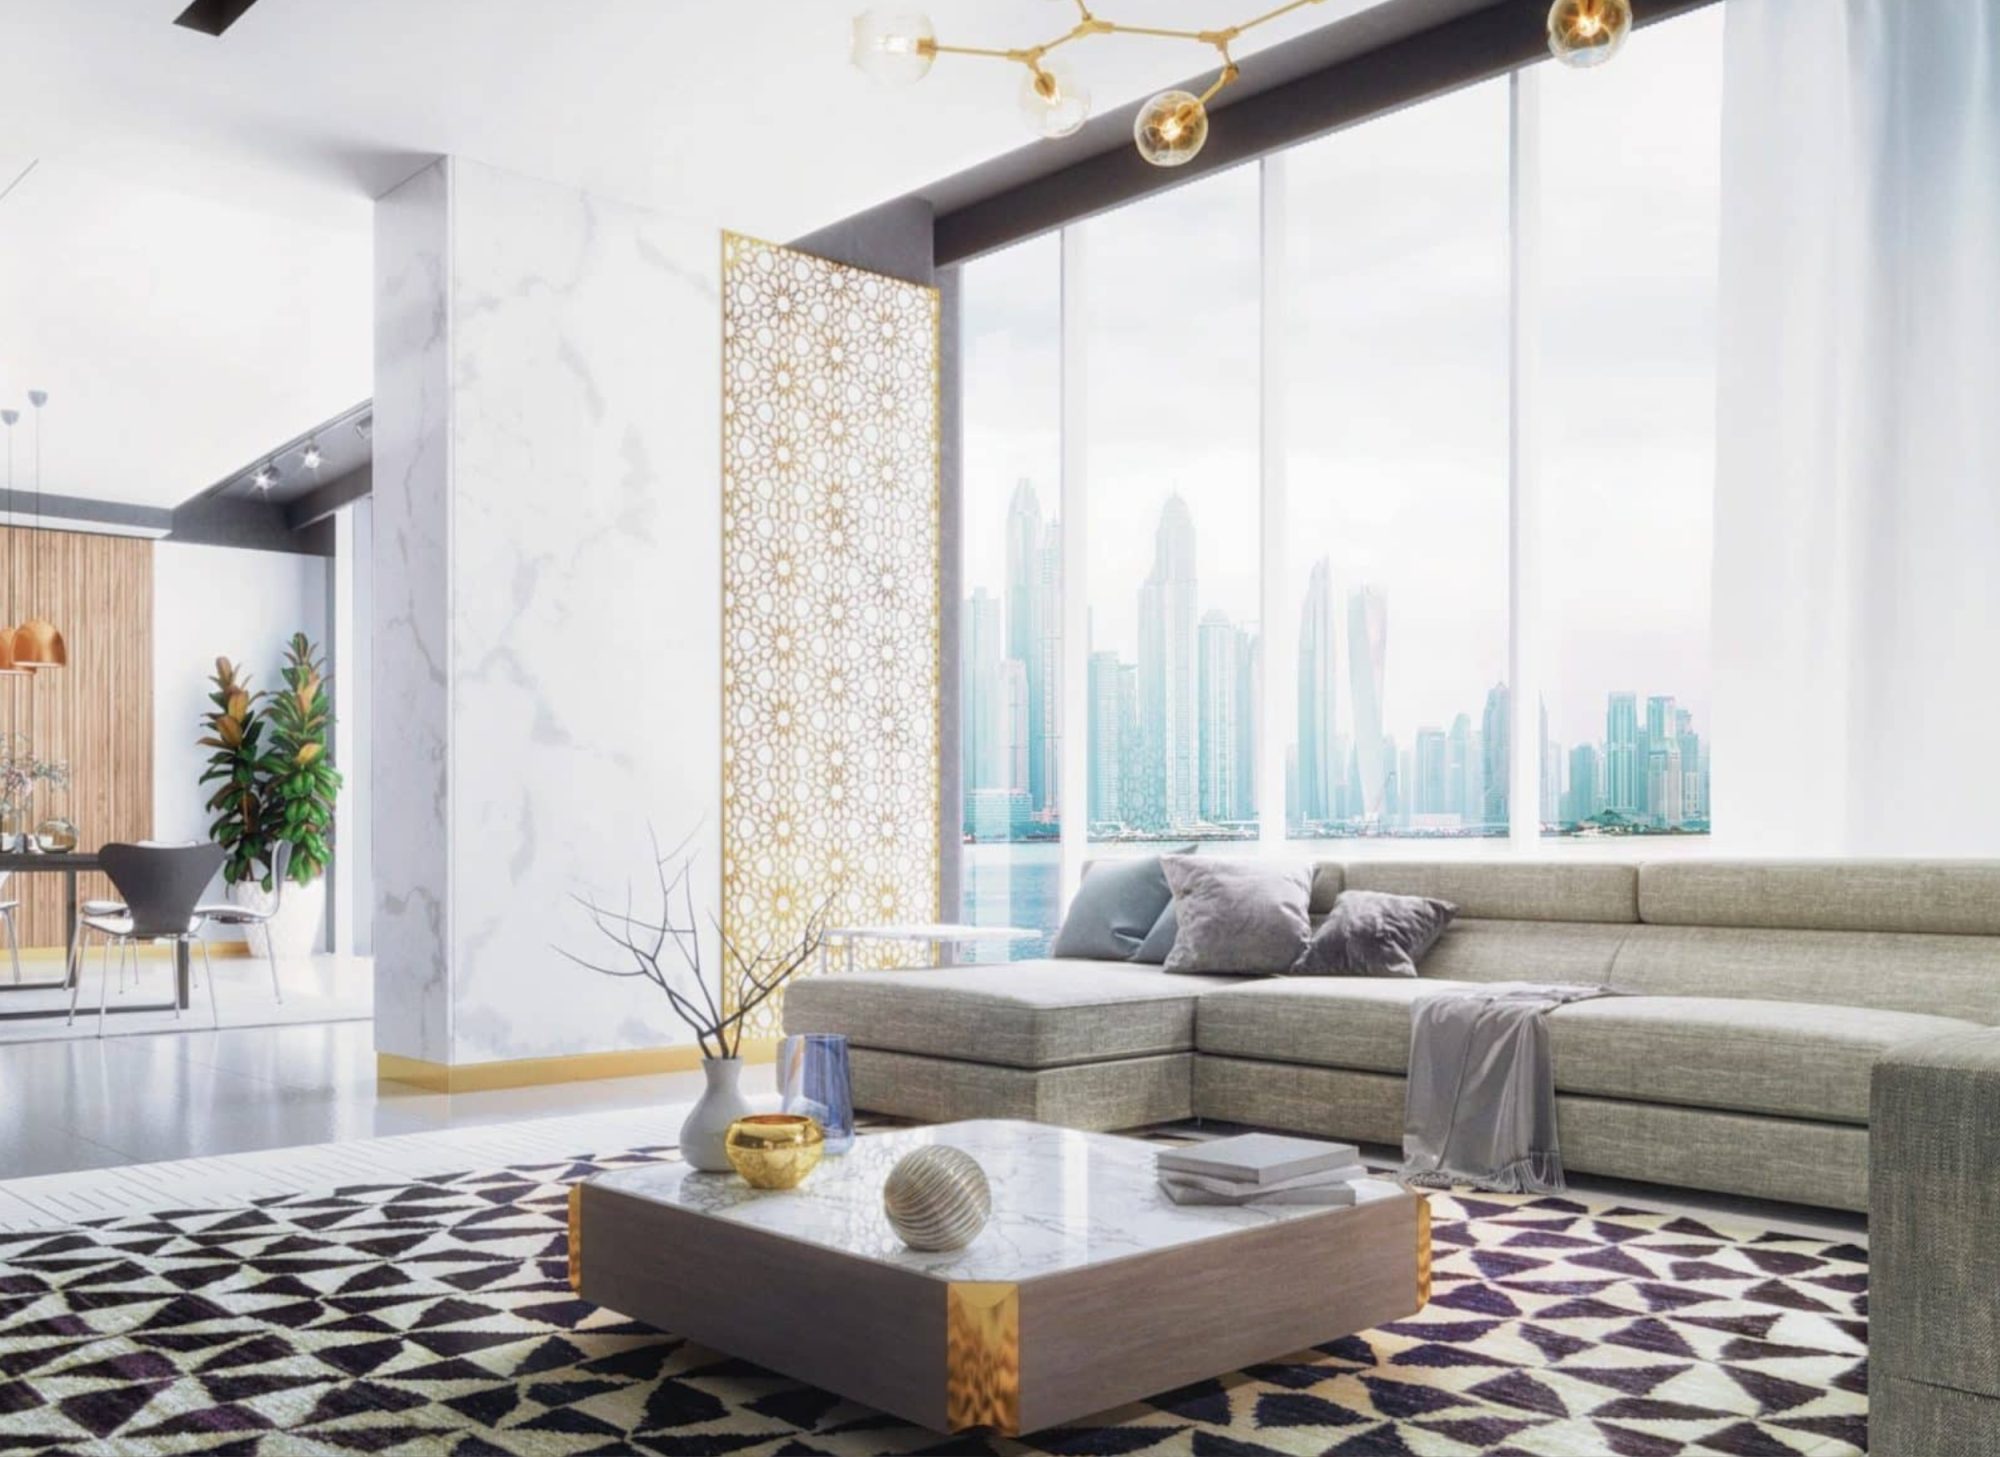 Seven Residences Palm Jumeirah by Seven Tide is a majestic abode offering iconic luxury living